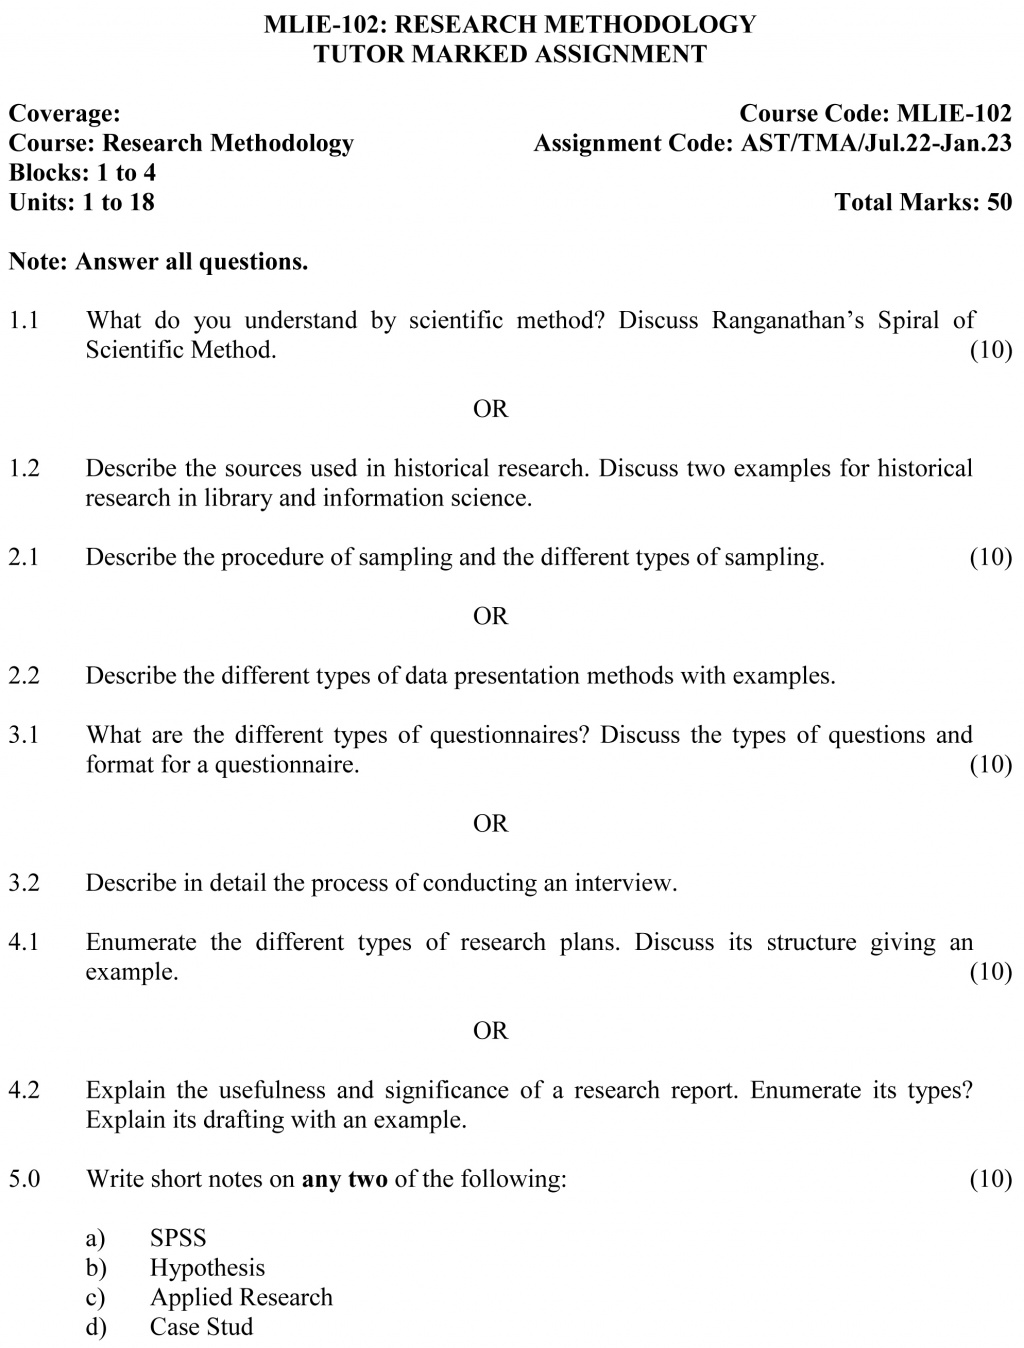 IGNOU MLIE-102 - Research Methodology, Latest Solved Assignment-July 2022 – January 2023